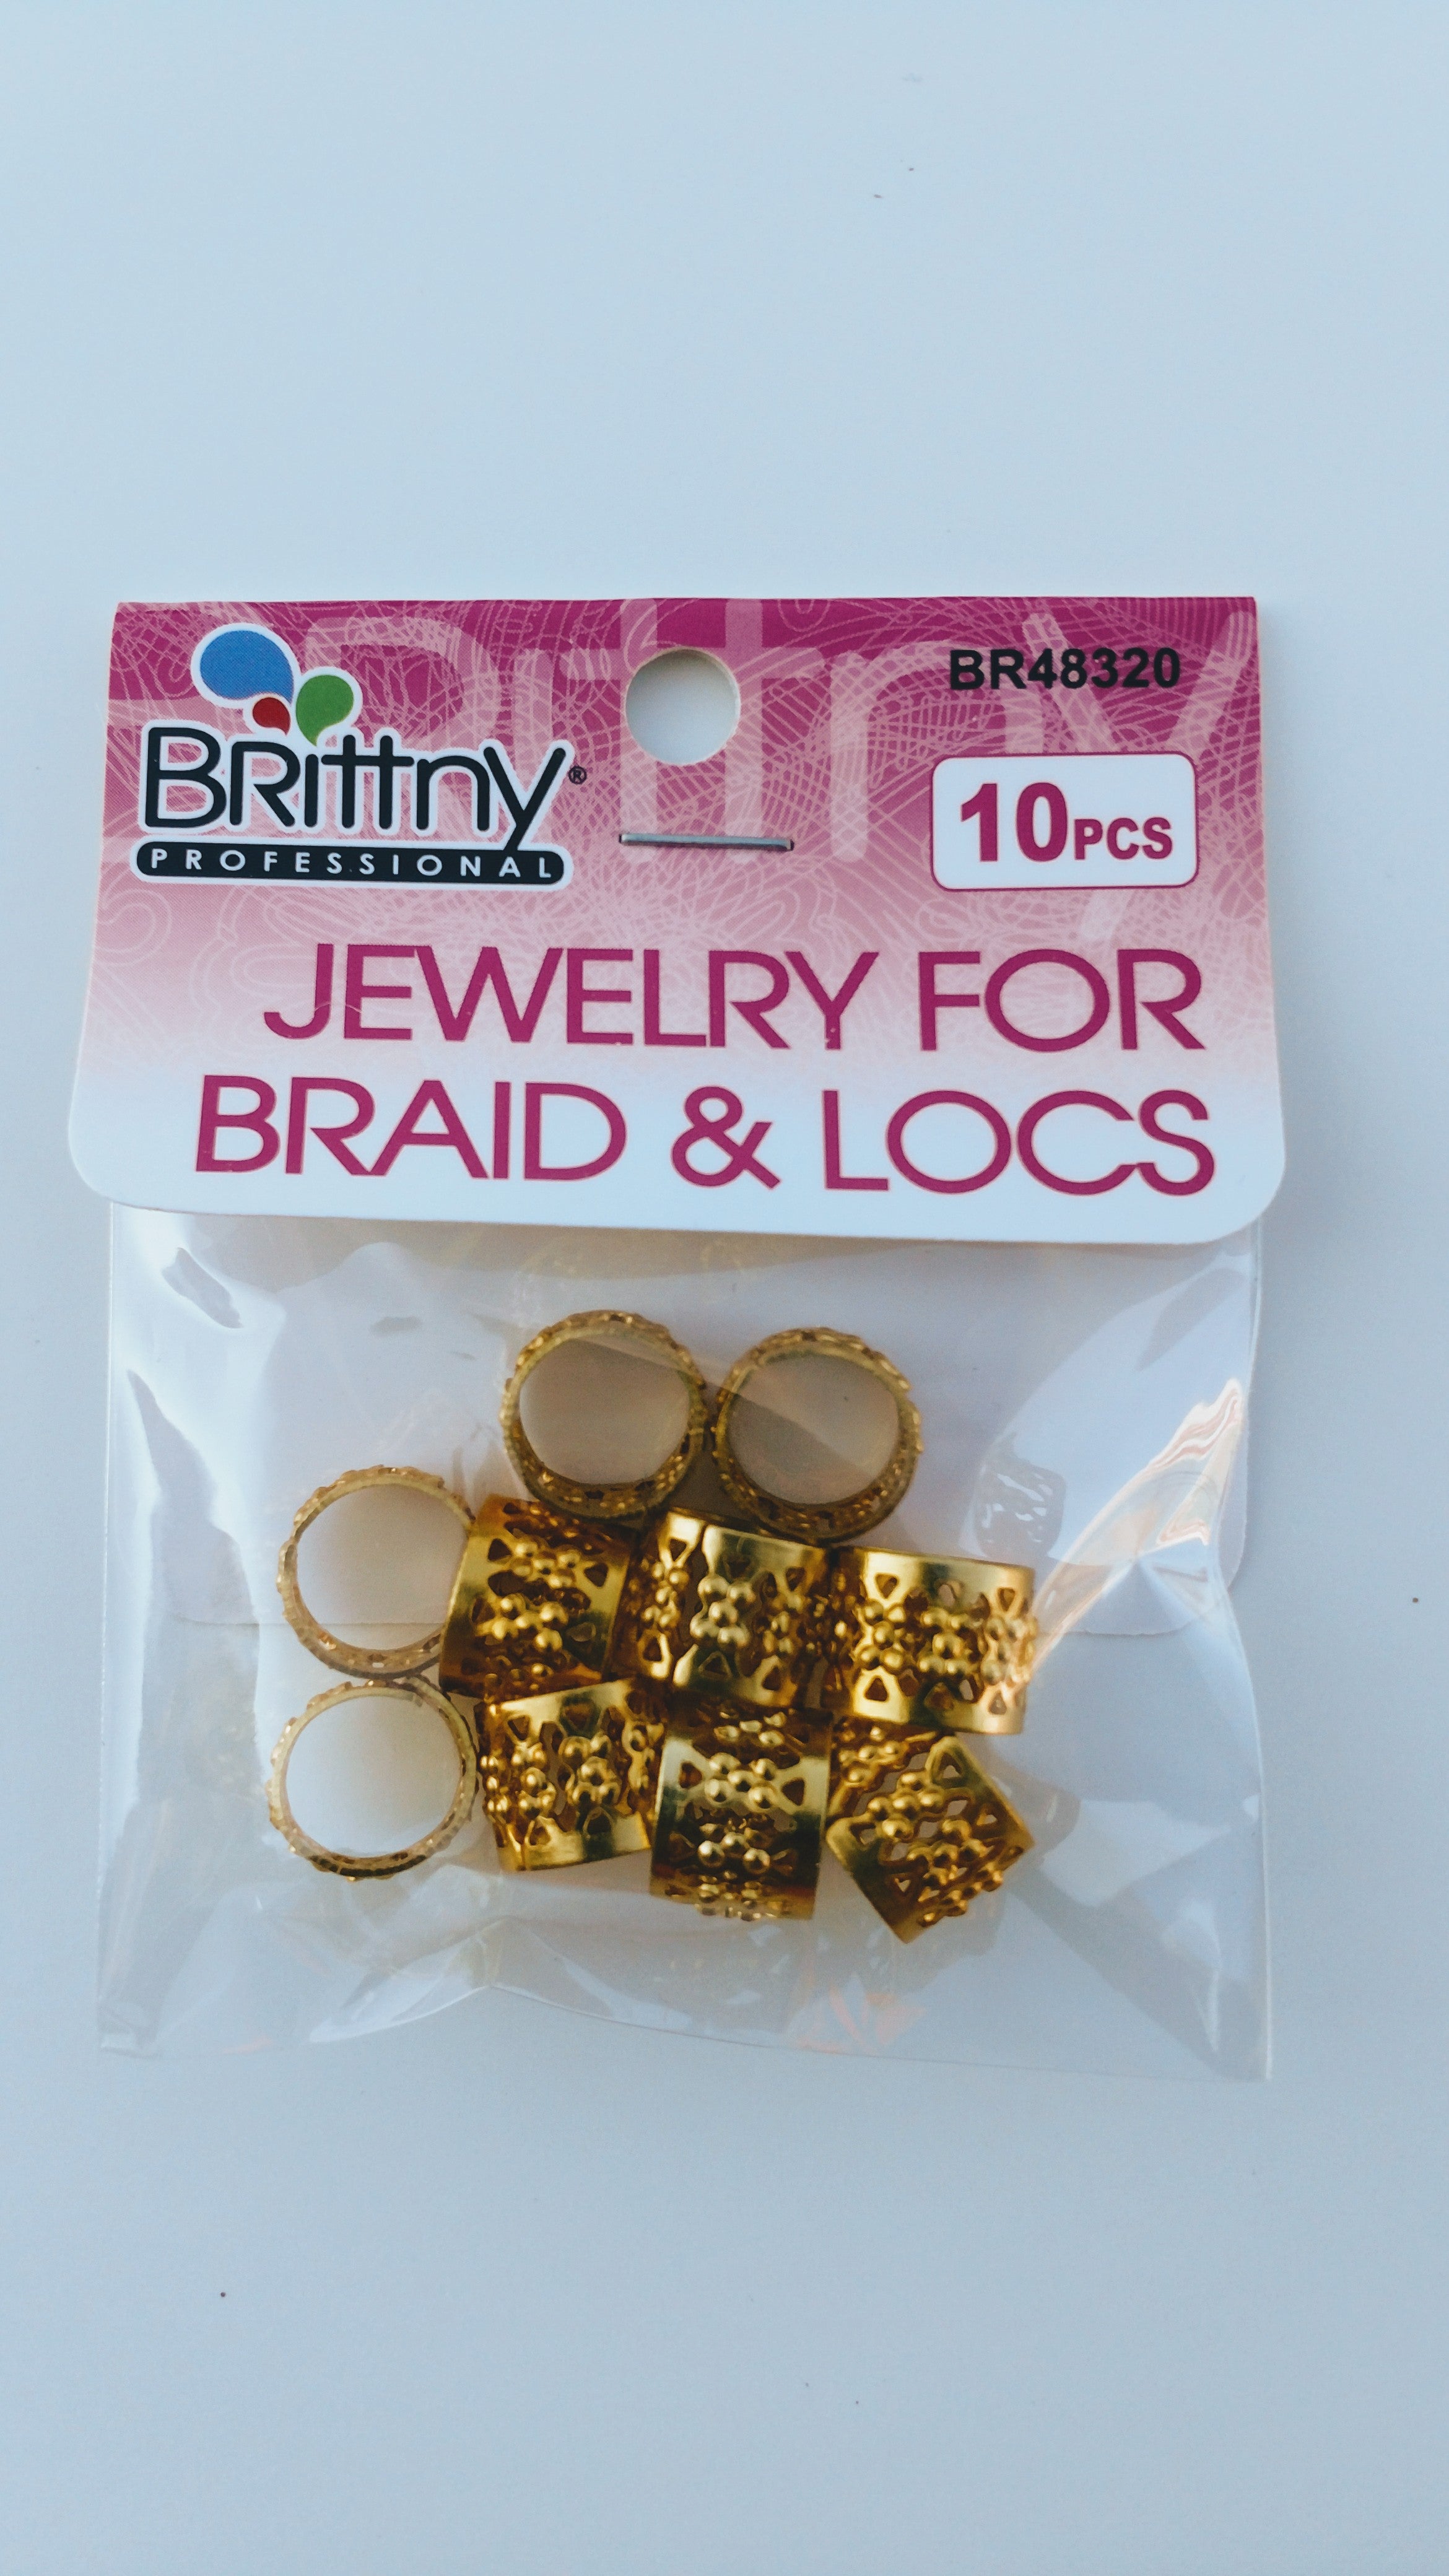 Brittny Jewelry for Braid &amp; Locs - Beauty Bar & Supply